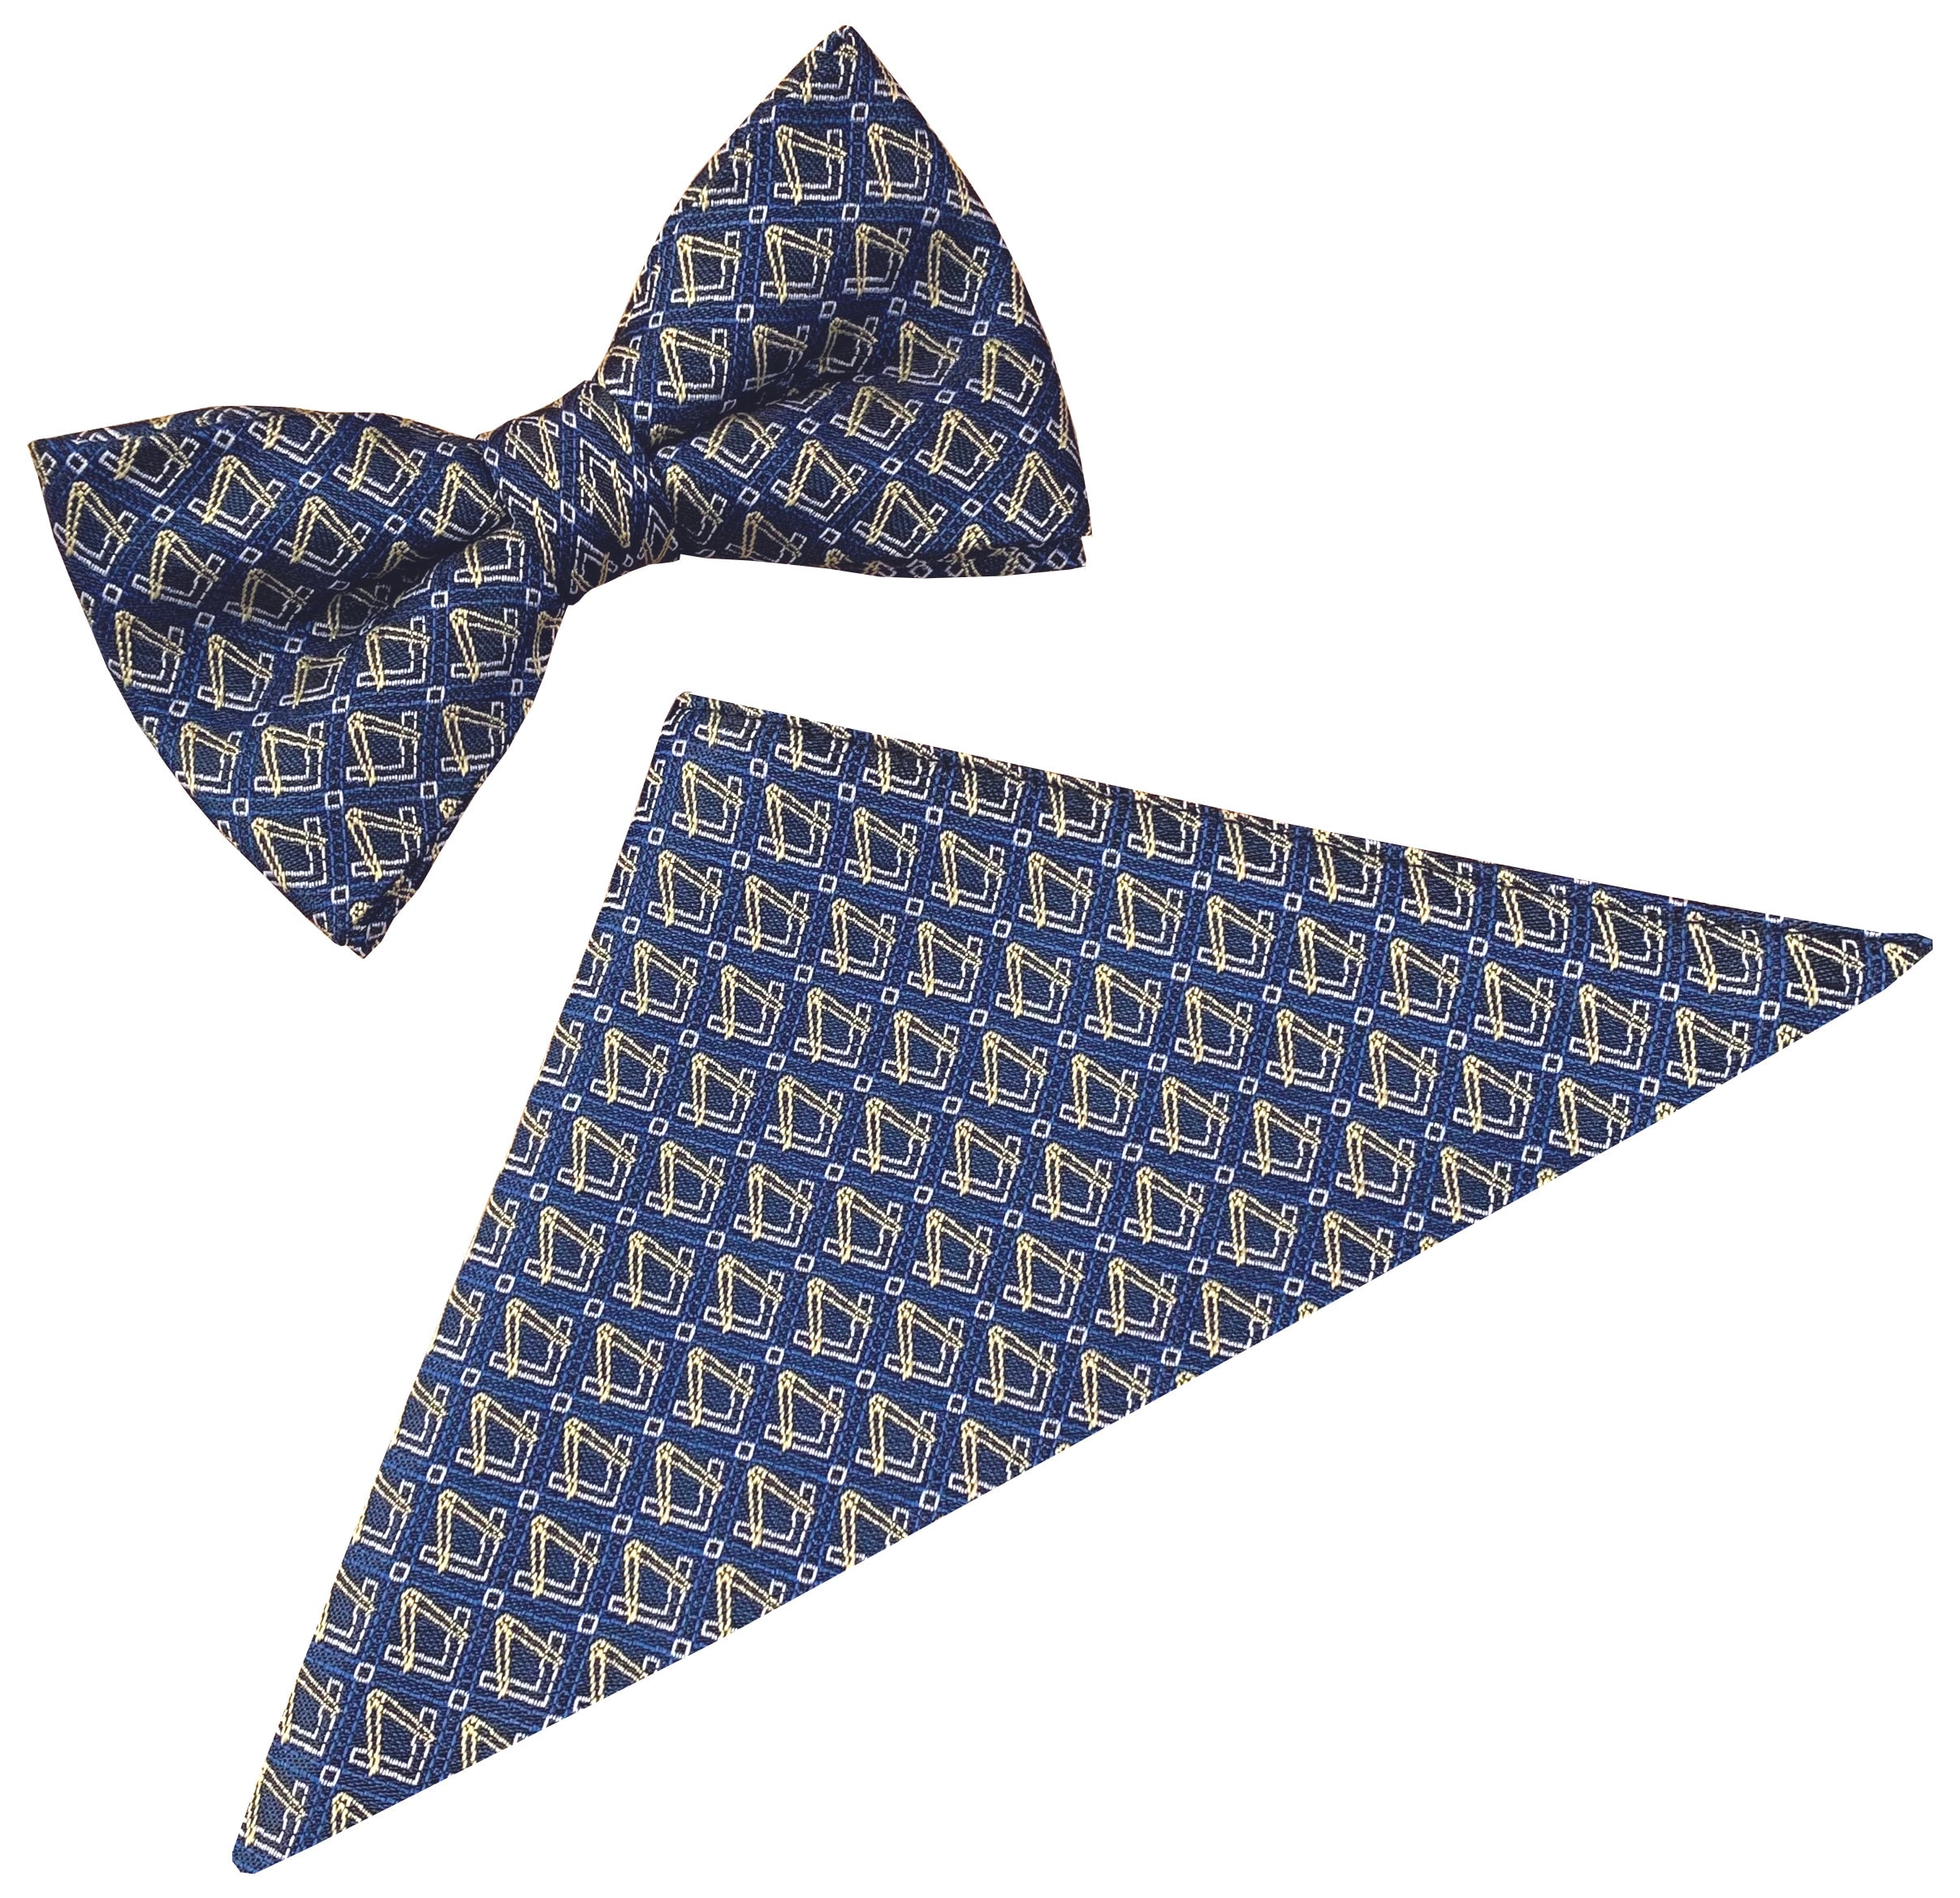 CHOOSE FROM 7 COLORS MASONIC CROSSOVER TIE NEW ADJUSTABLE 